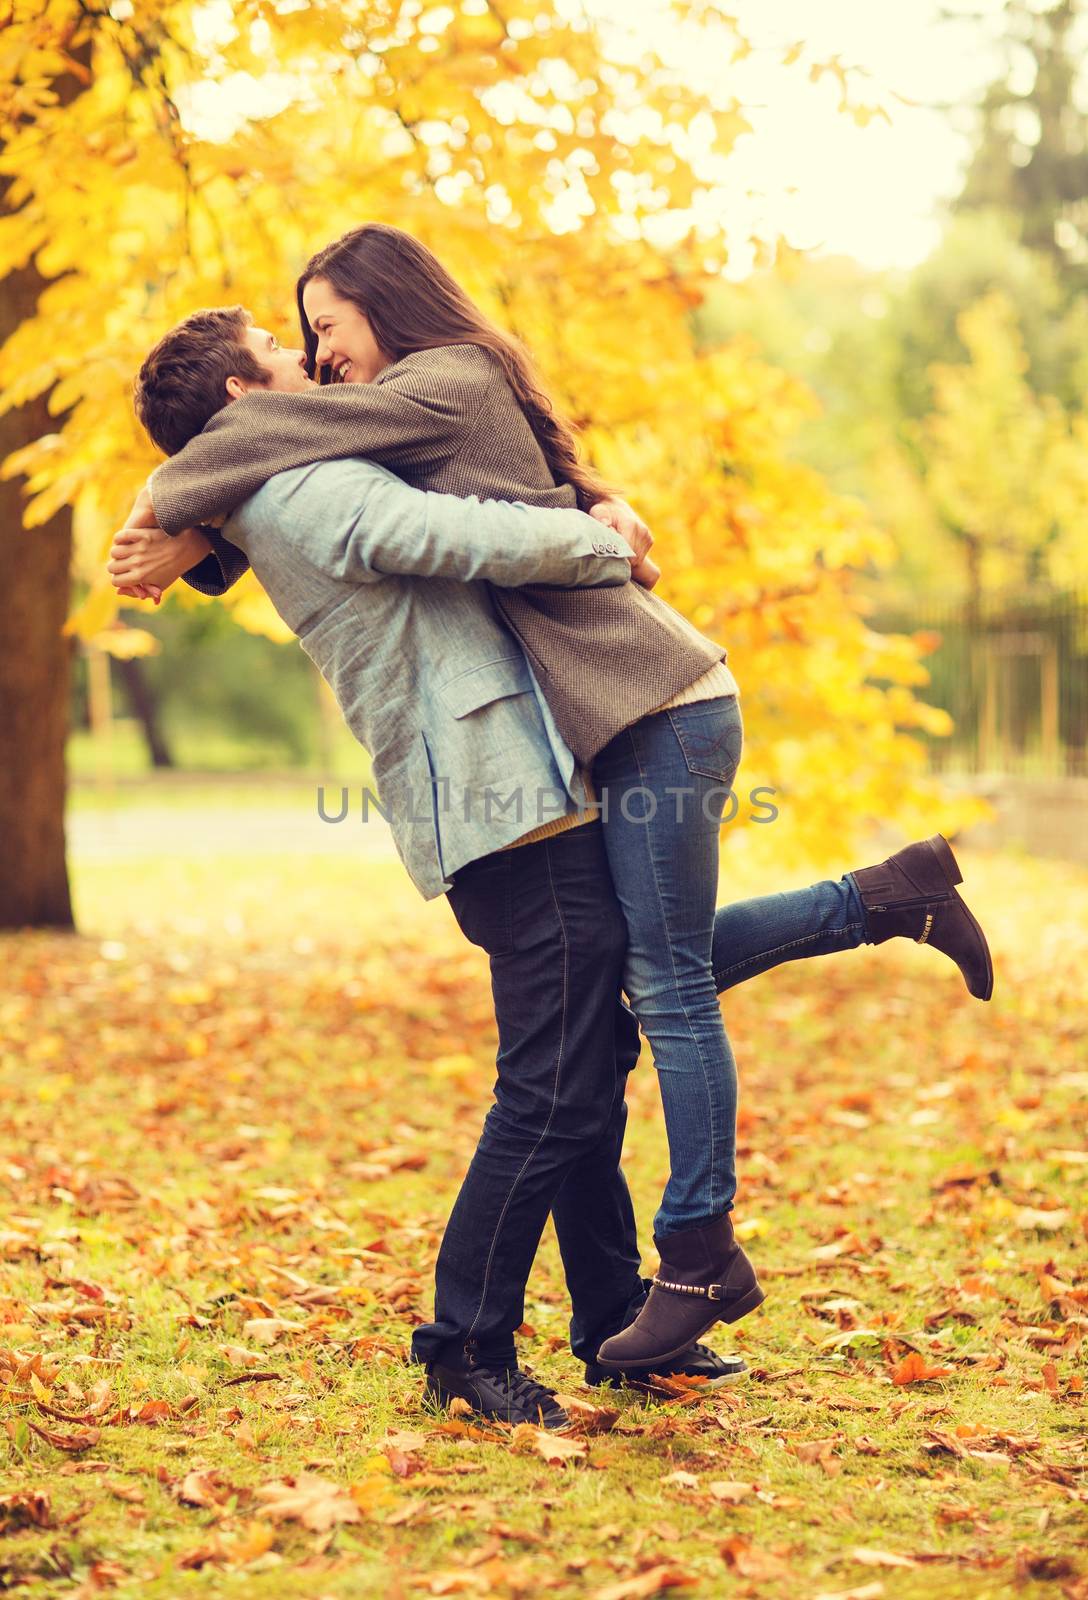 romantic couple playing in the autumn park by dolgachov